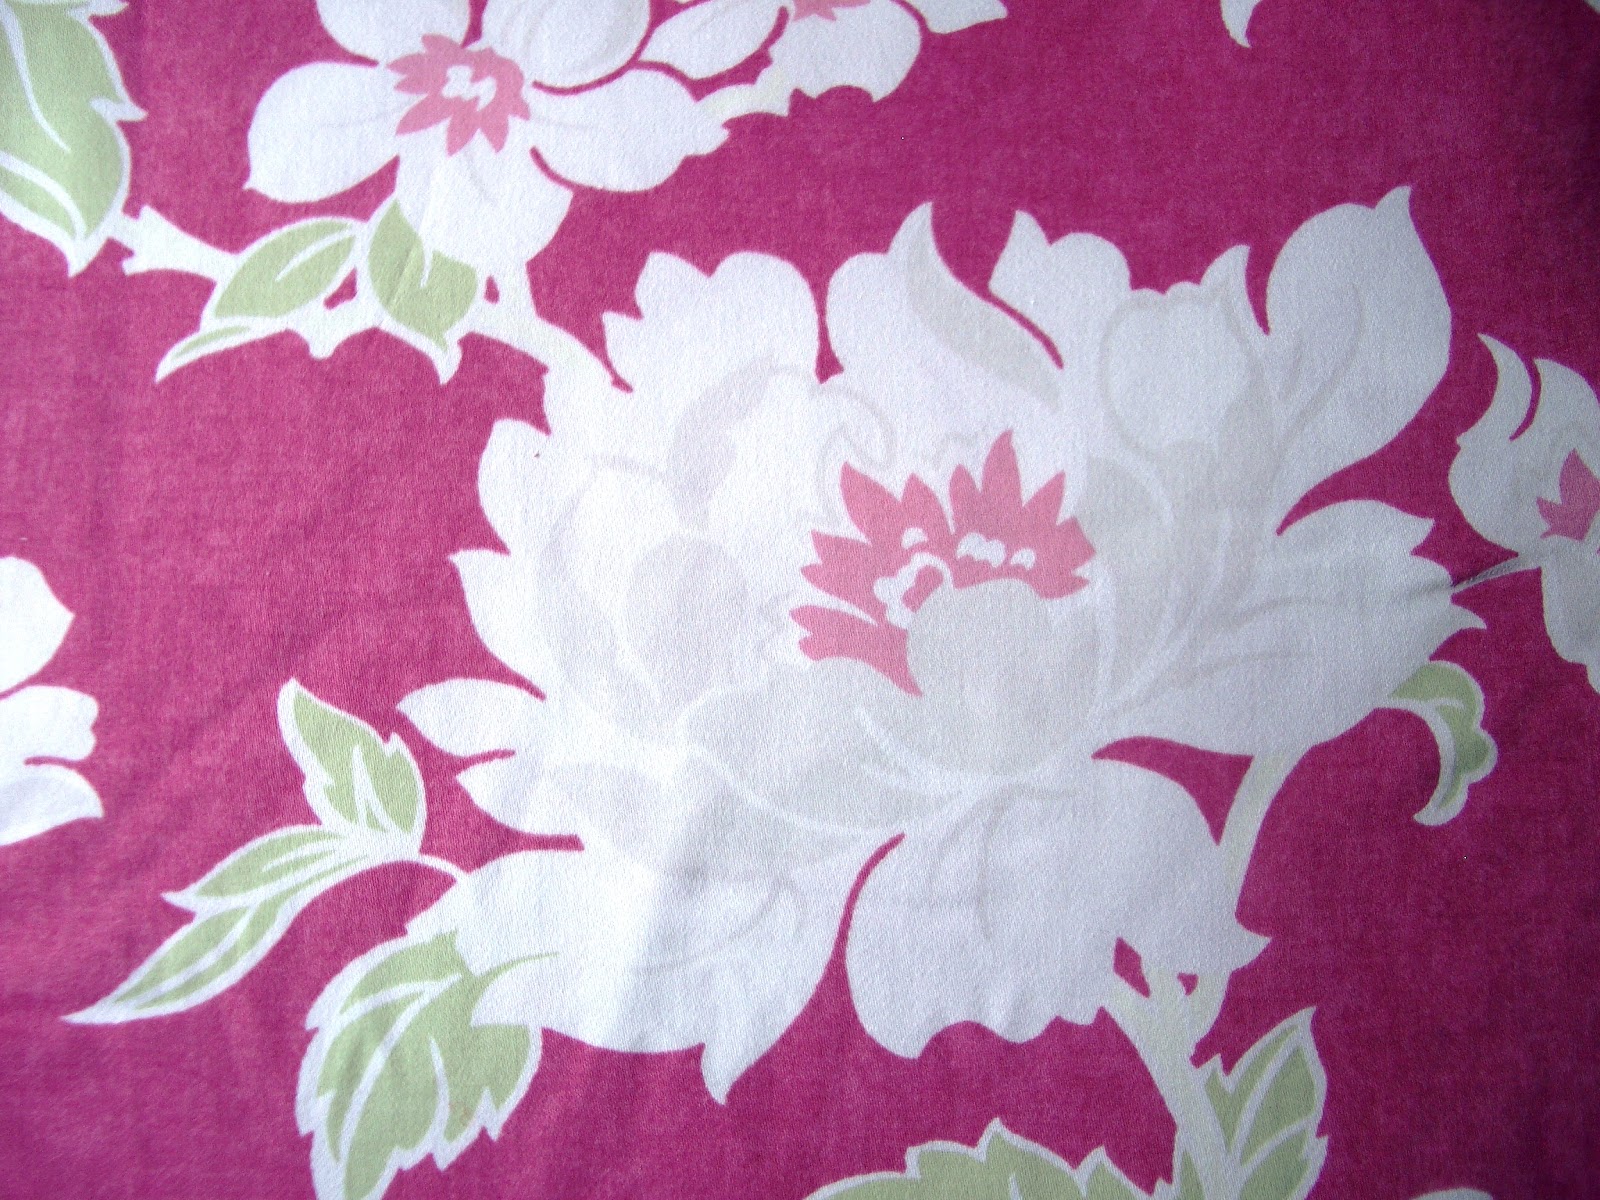 Flowers in the Window: Laura Ashley Fabrics on Auction